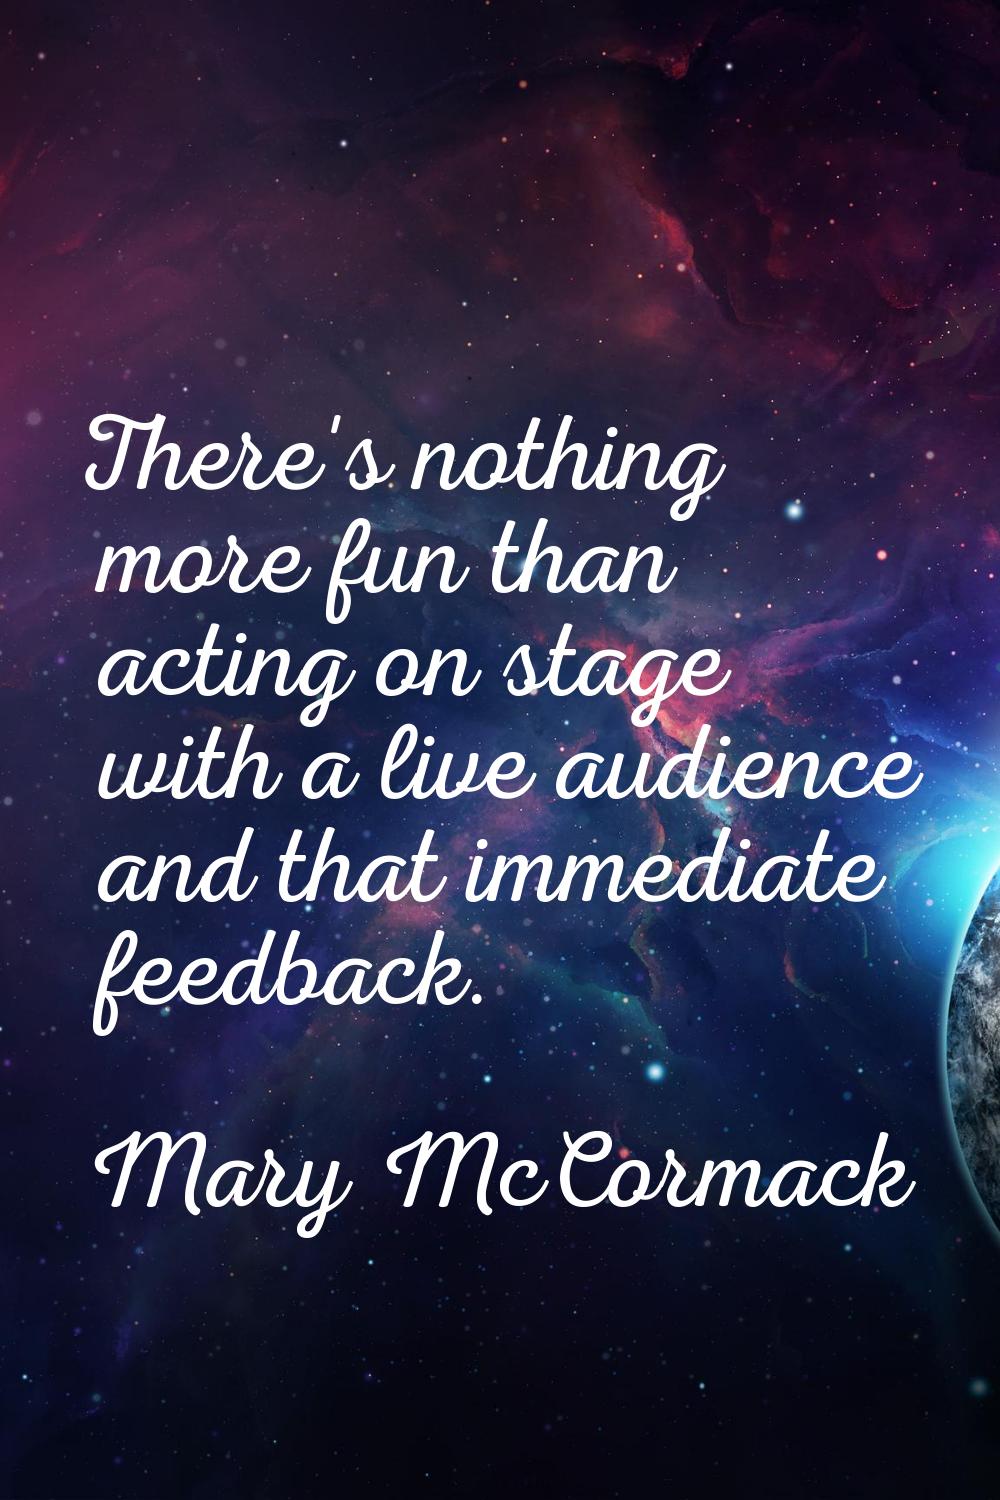 There's nothing more fun than acting on stage with a live audience and that immediate feedback.